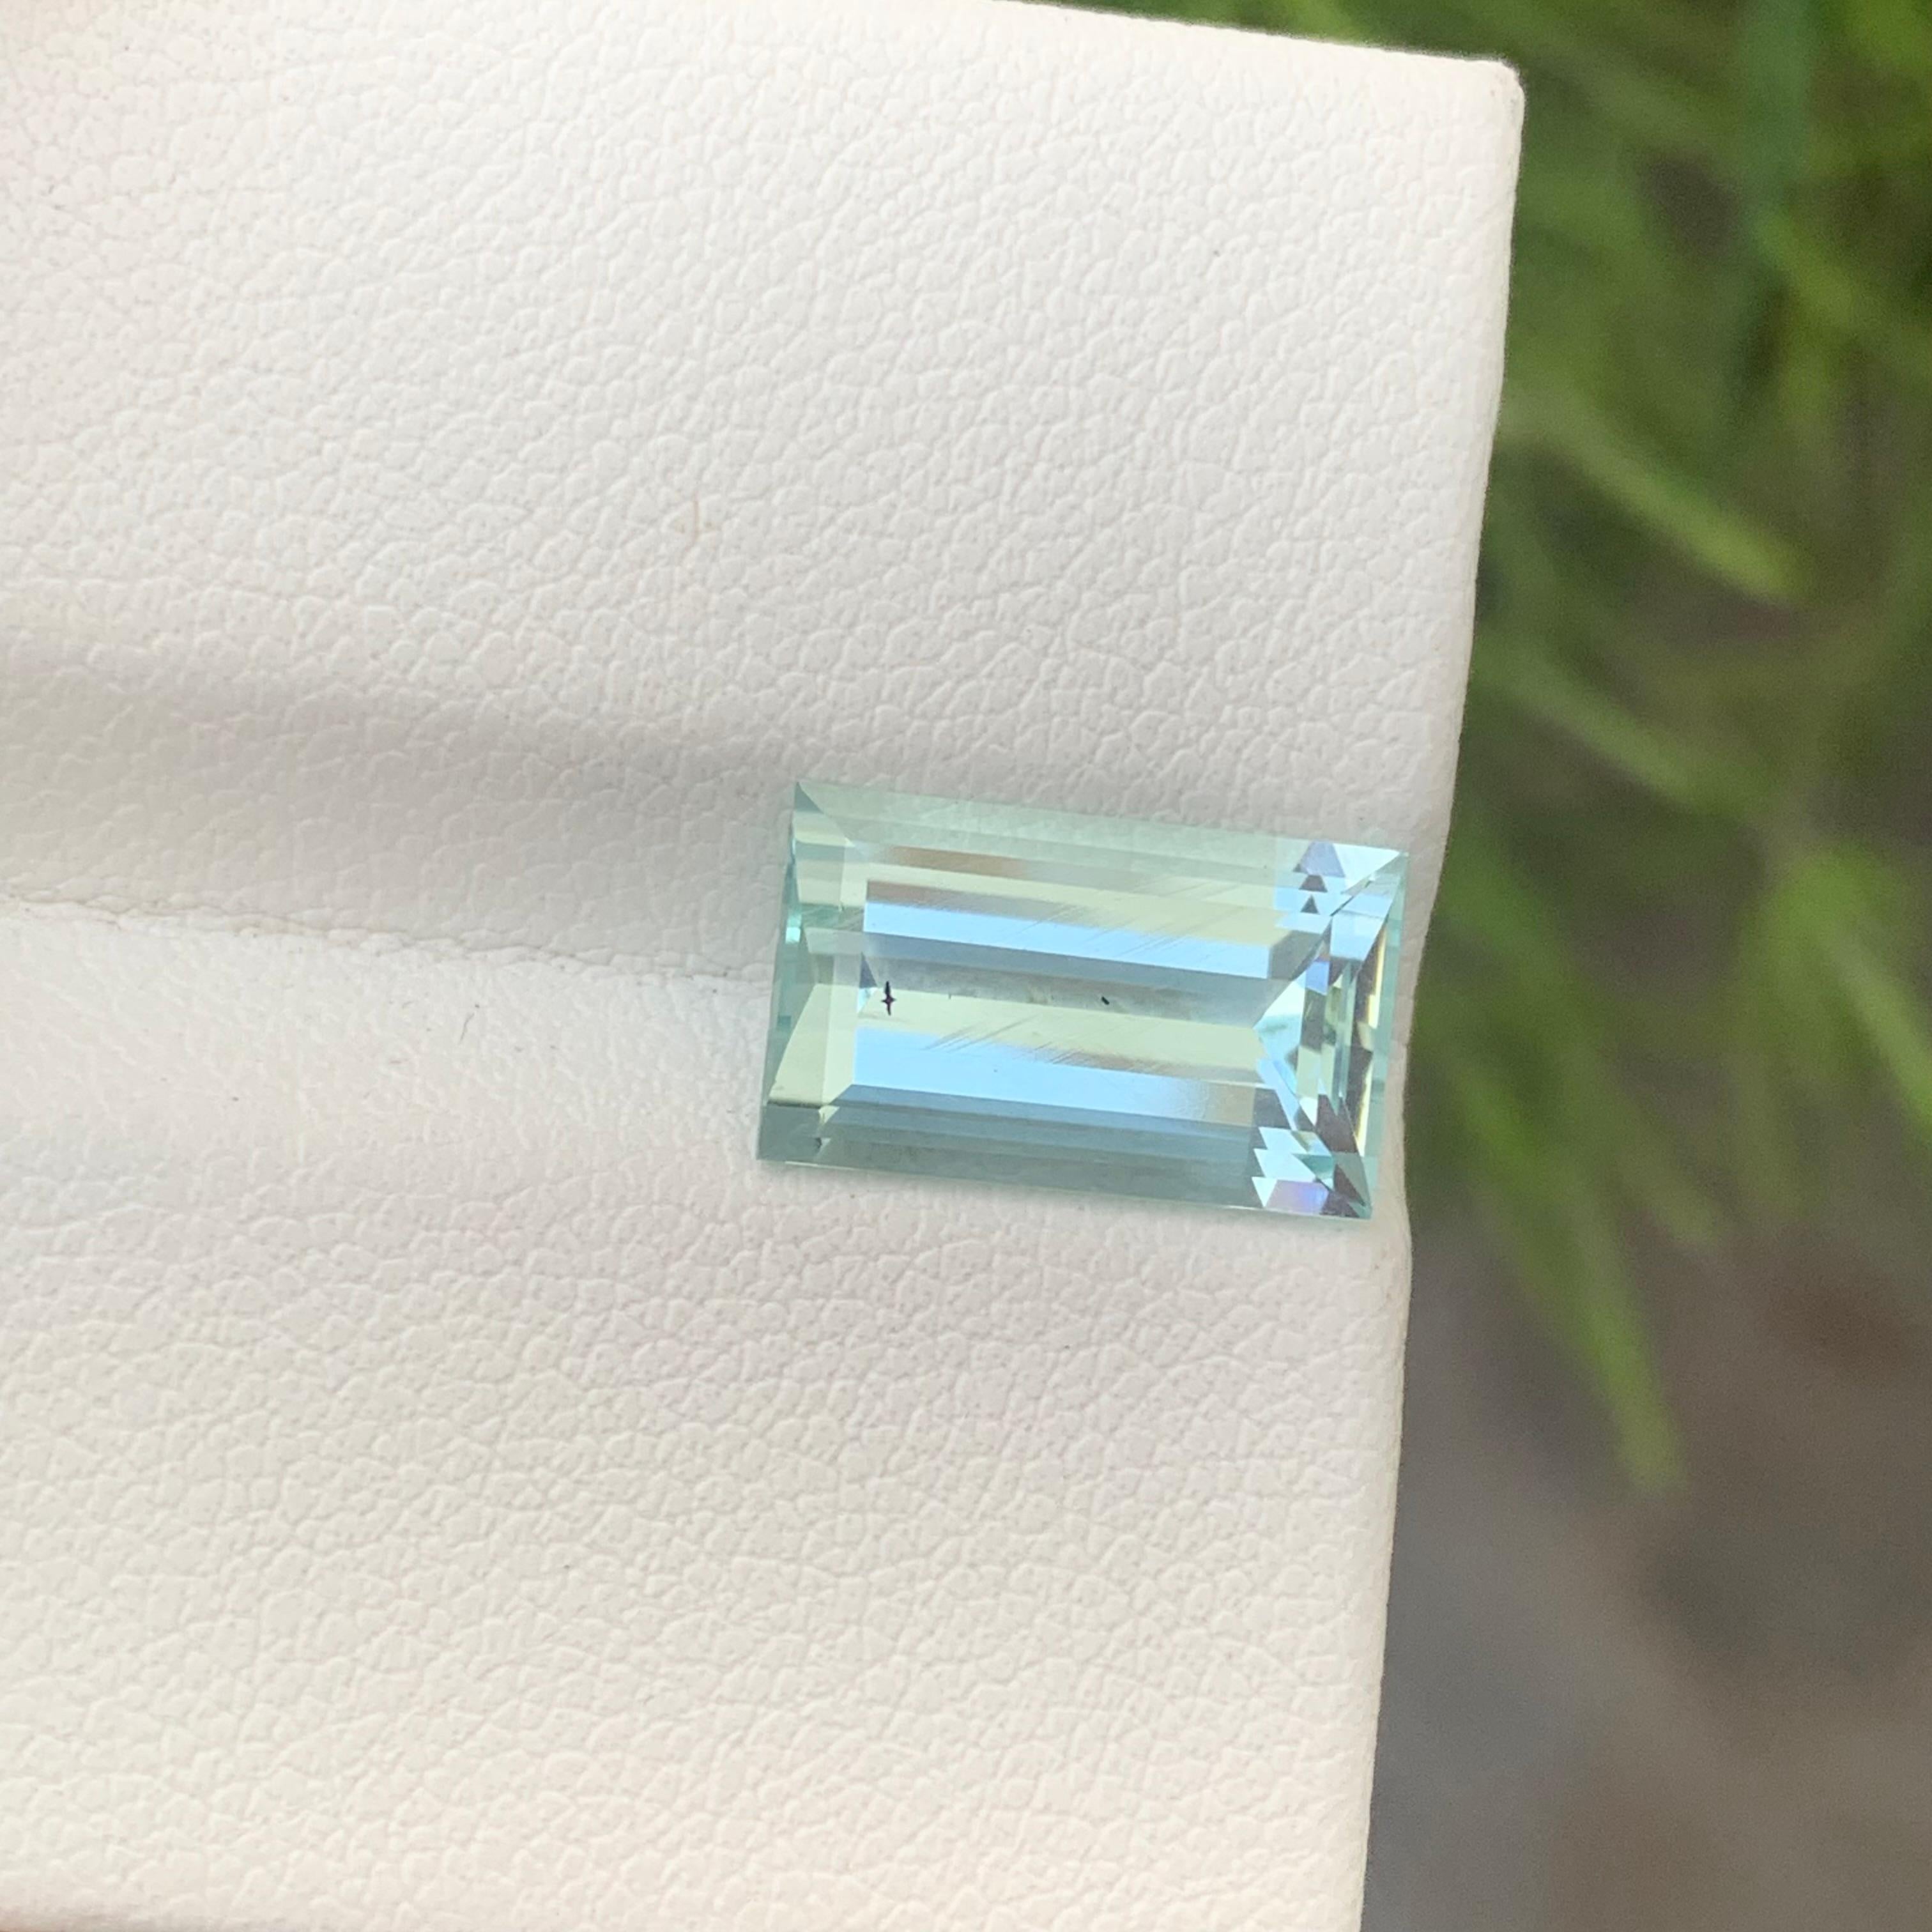 Gemstone Type : Aquamarine
Weight : 4.10 Carats
Dimensions : 13x7.9x5.4m
Clarity : Eye Clean
Origin : Pakistan
Shape: Baguette
Color: Light Blue
Certificate: On Demand
Birthstone Month: March
It has a shielding effect on your energy field and has